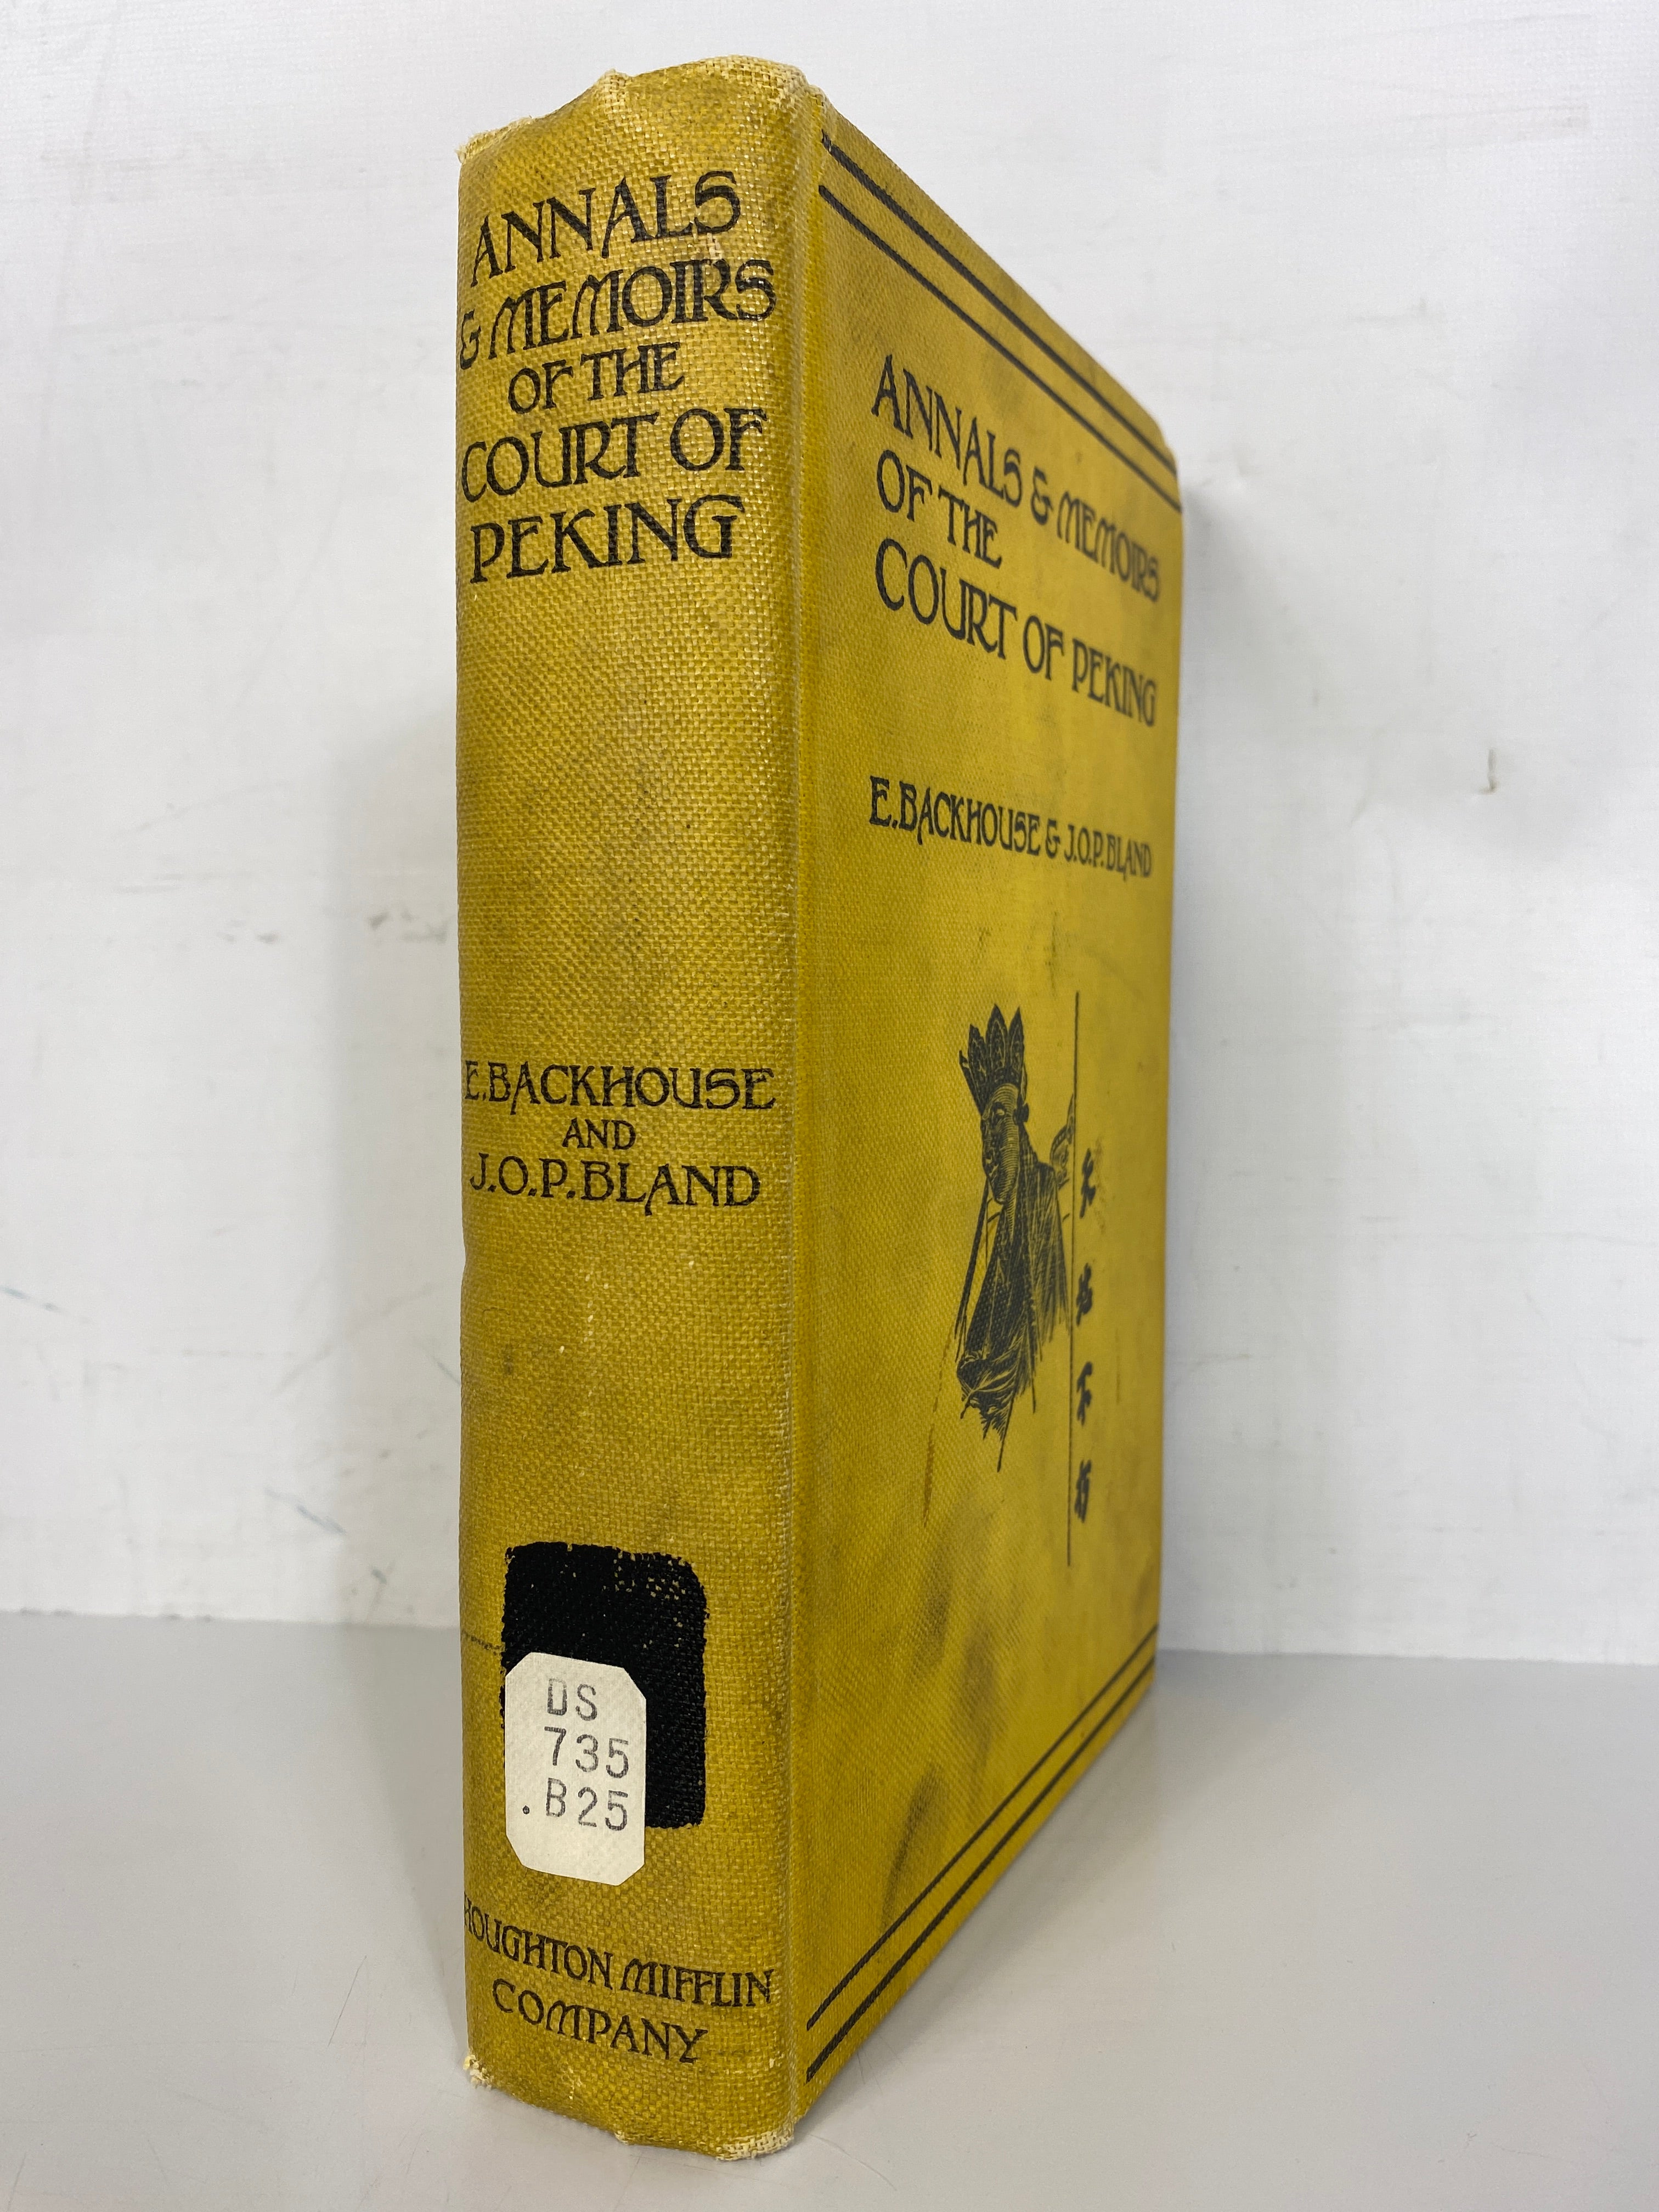 Annals & Memoirs of the Court of Peking by Backhouse and Bland 1914 Antique Illustrated HC